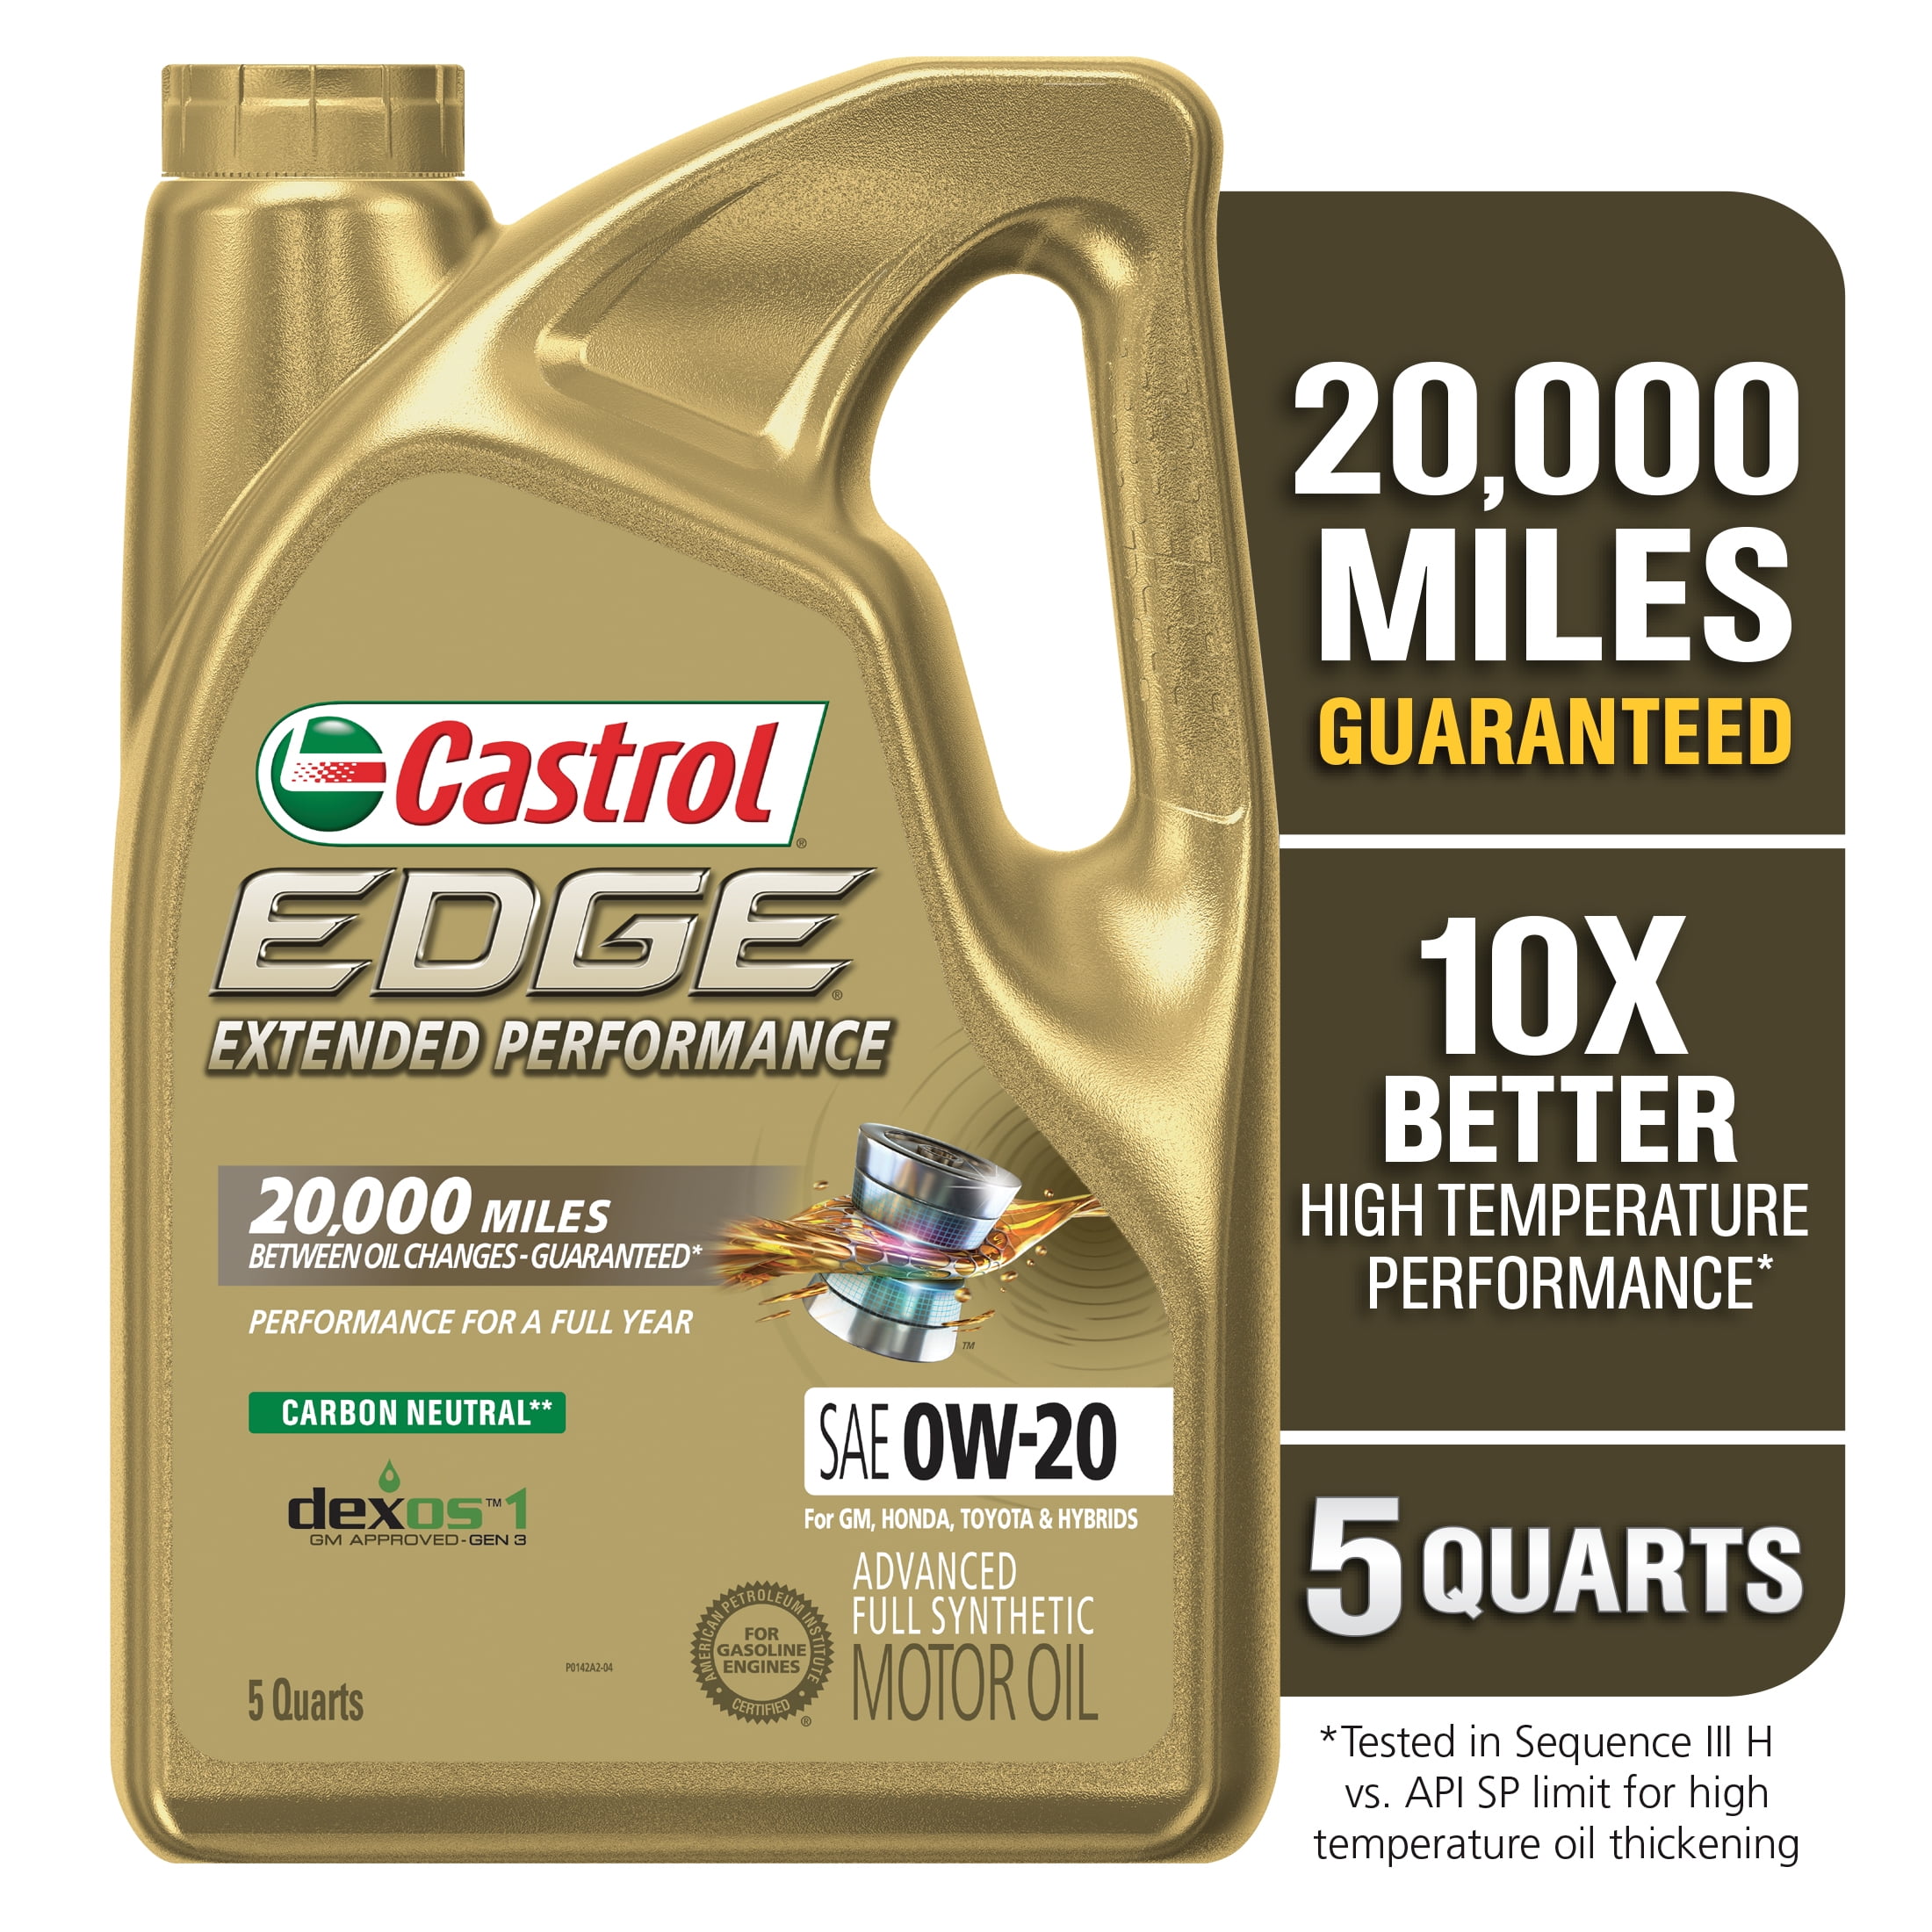 Castrol Edge Extended Performance 0W-20 Advanced Full Synthetic Motor Oil, 5 Quarts